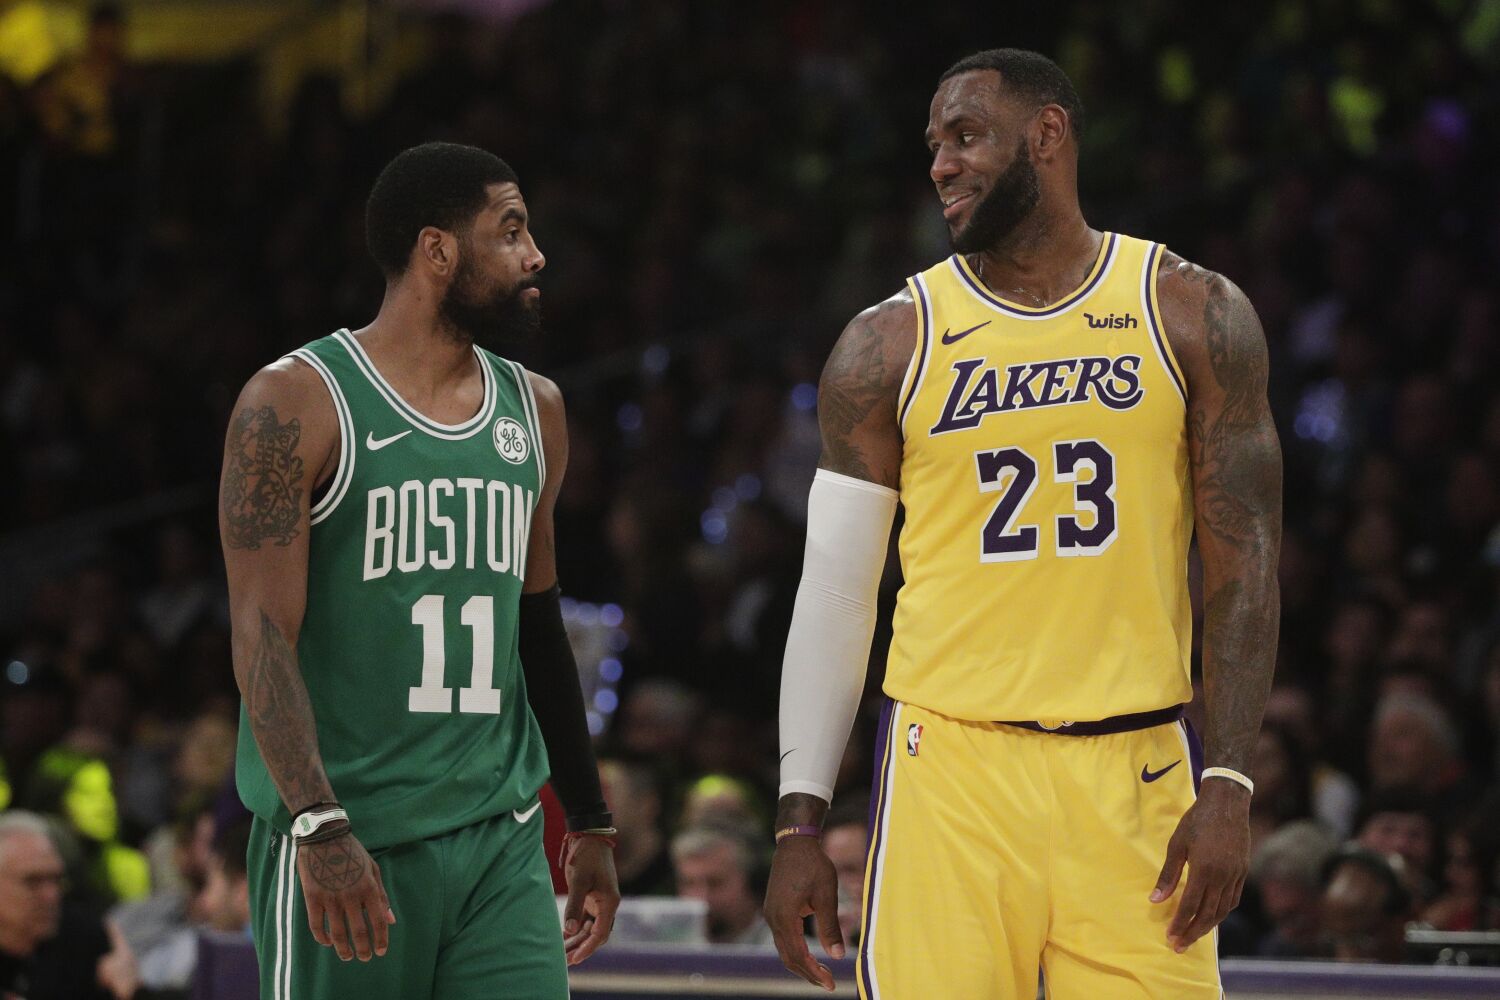 LeBron James continues pursuit of scoring record in wake of Kyrie Irving trade